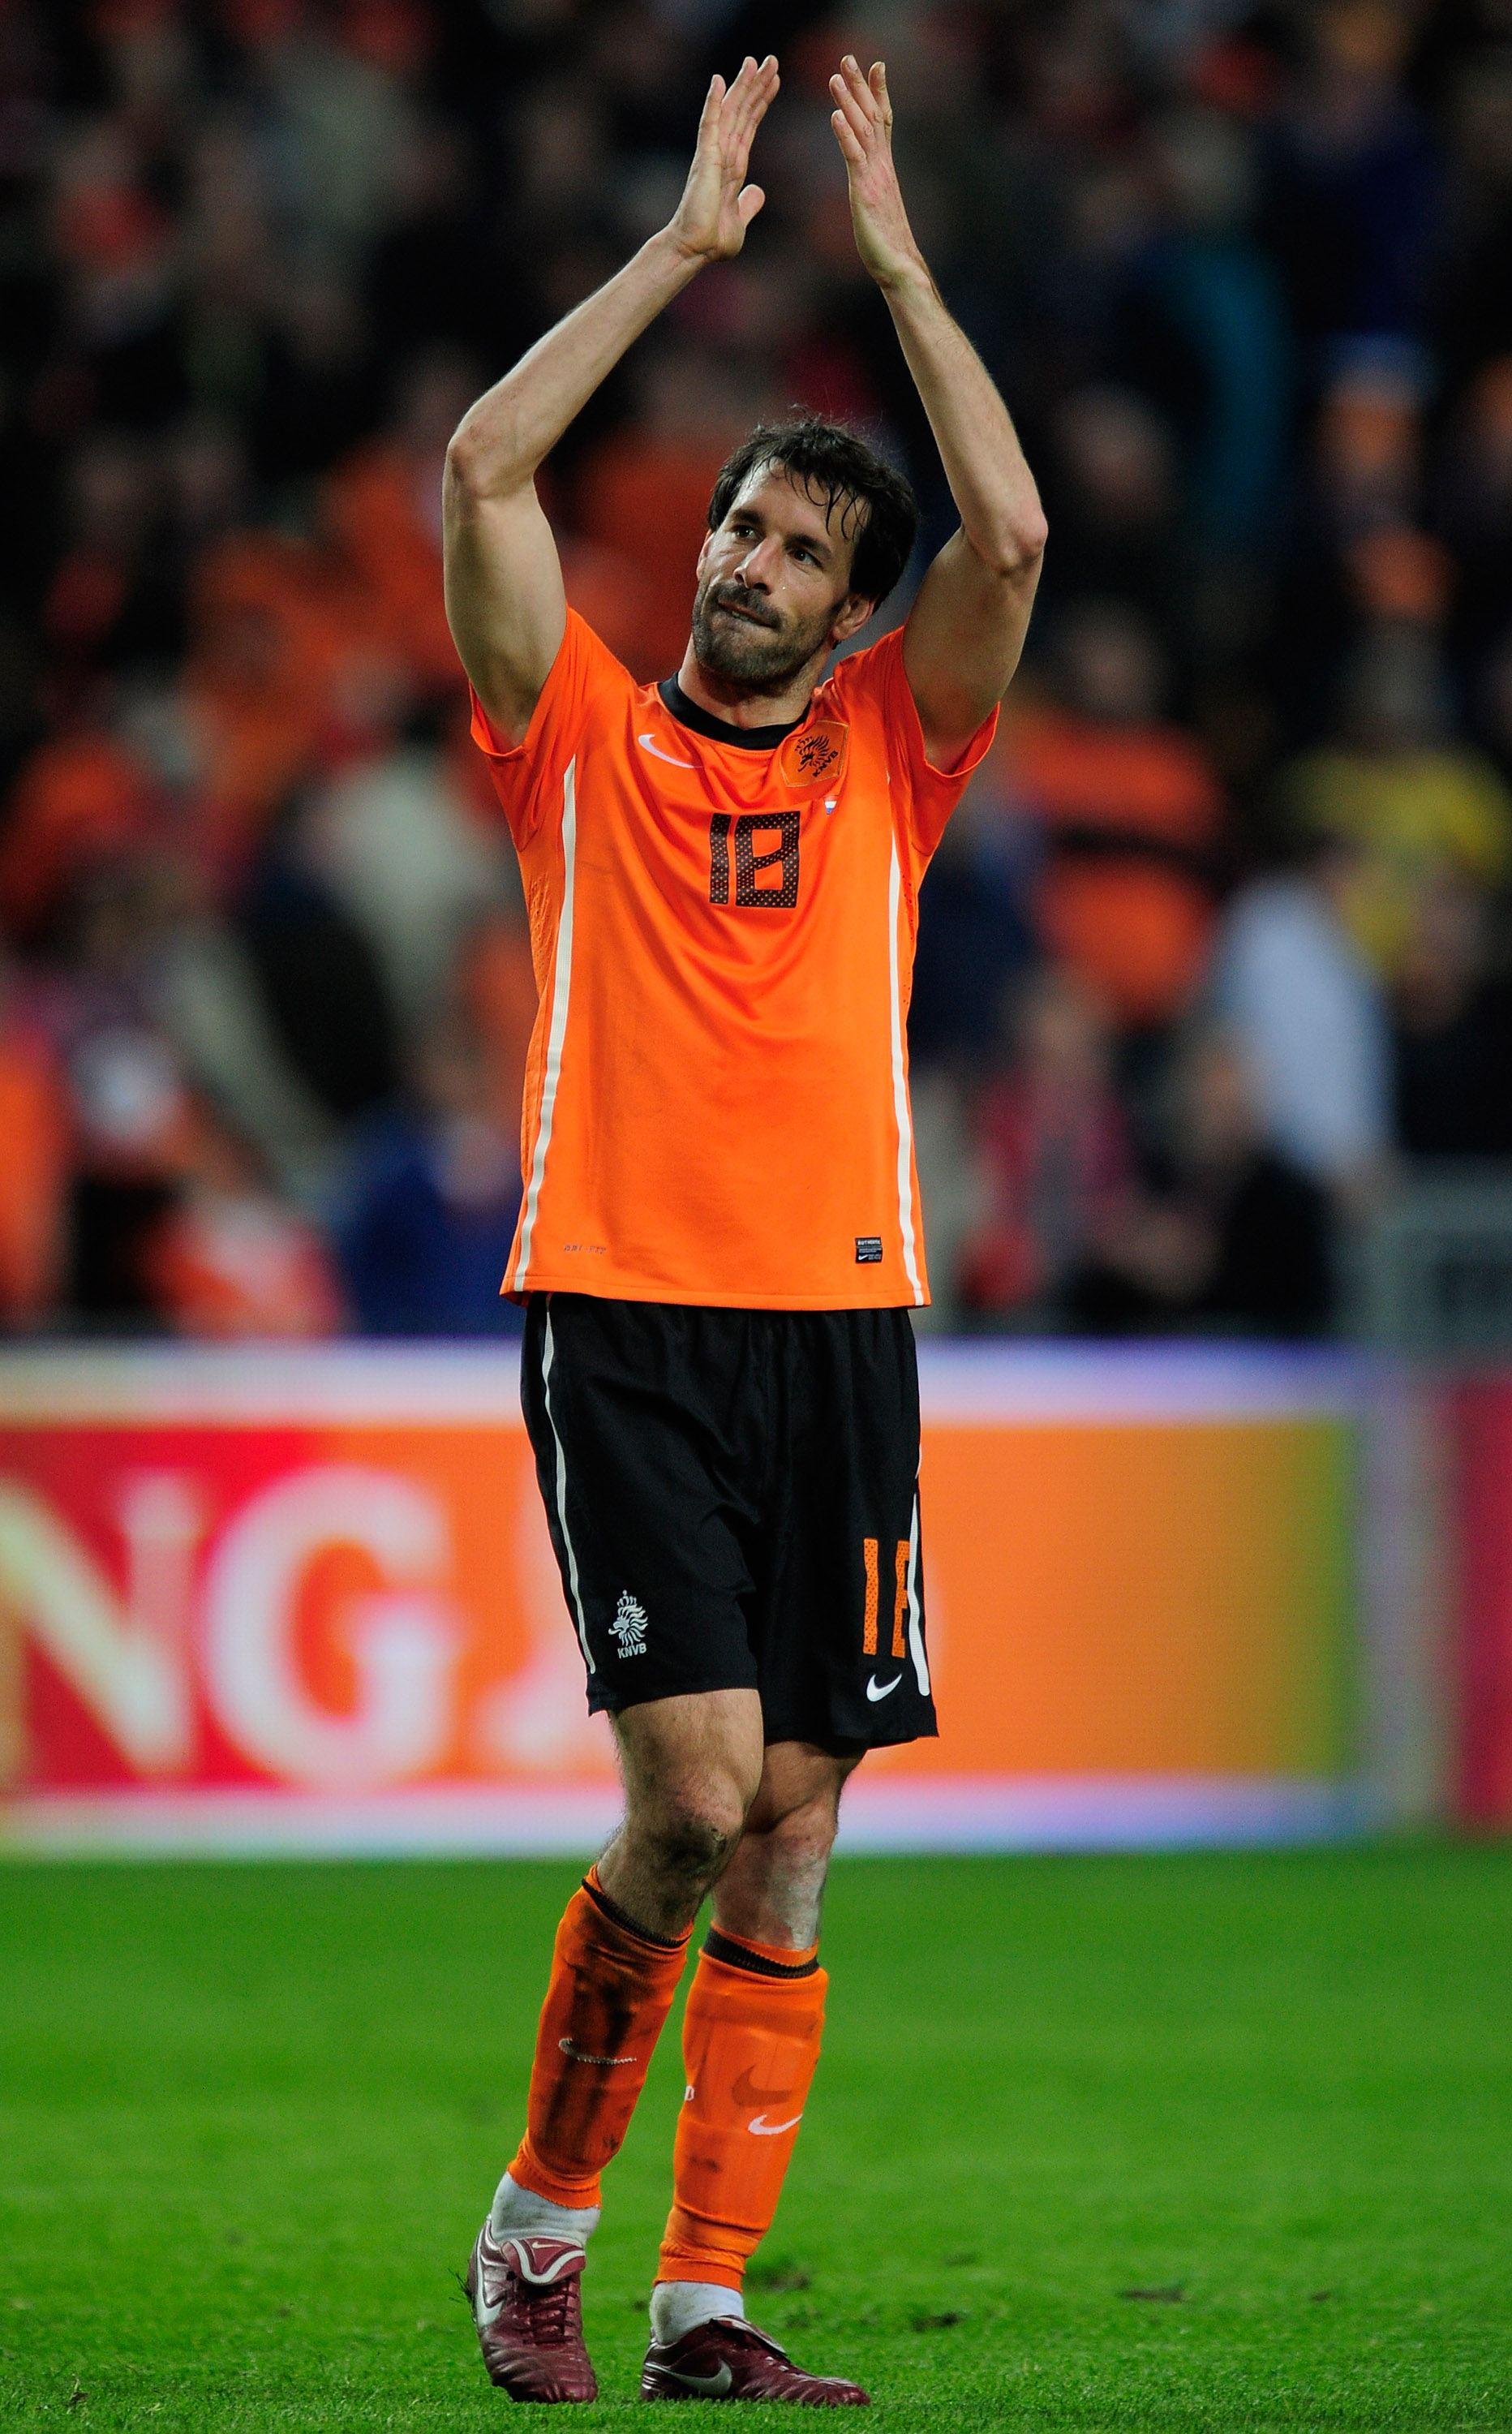 AMSTERDAM, NETHERLANDS - MARCH 29:  Ruud van Nistelrooy of the Netherlands looks on during the Group E, EURO 2012 Qualifier between Netherlands and Hungary at the Amsterdam Arena on March 29, 2011 in Amsterdam, Netherlands.  (Photo by Jamie McDonald/Getty